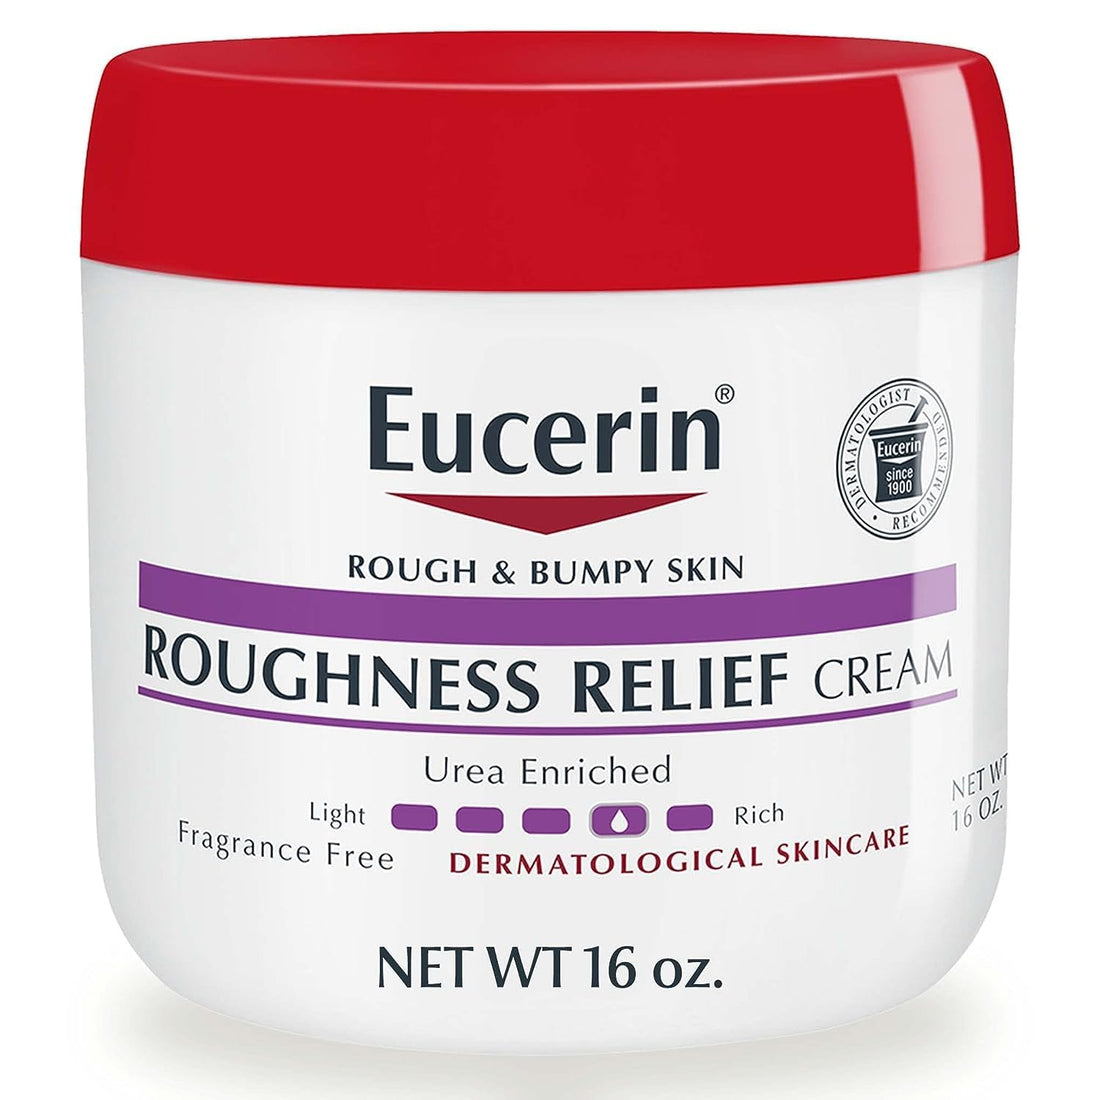 Eucerin Roughness Relief Cream, Fragrance Free Body Cream for Dry Skin Eucerin Roughness Relief Cream, Fragrance Free Body Cream for Dry Skin